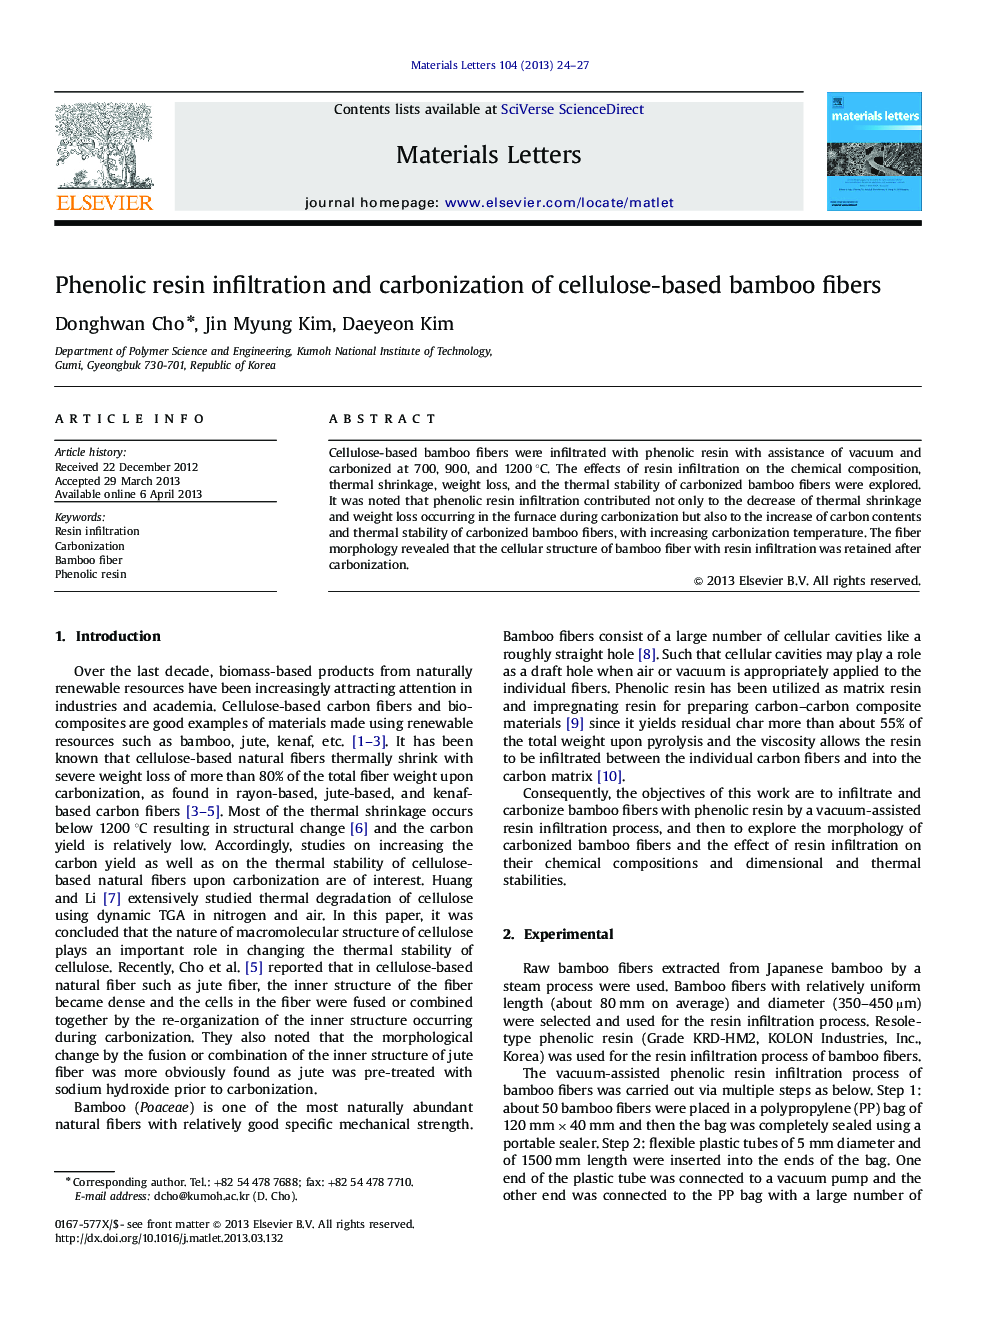 Phenolic resin infiltration and carbonization of cellulose-based bamboo fibers